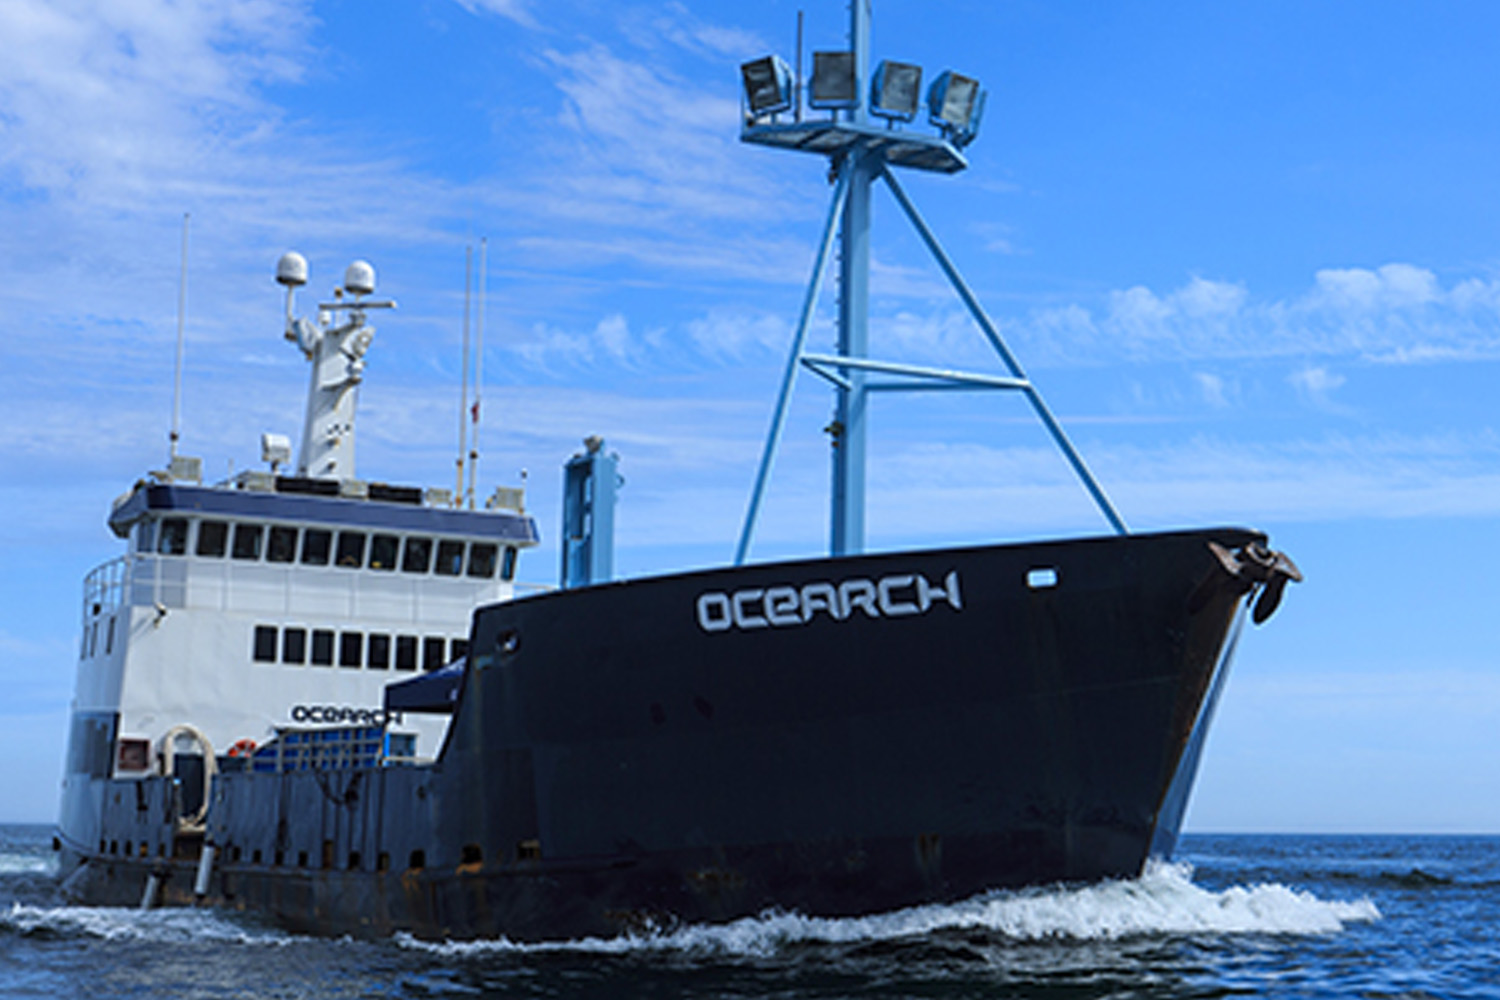 Ocearch vessel used for research and education.